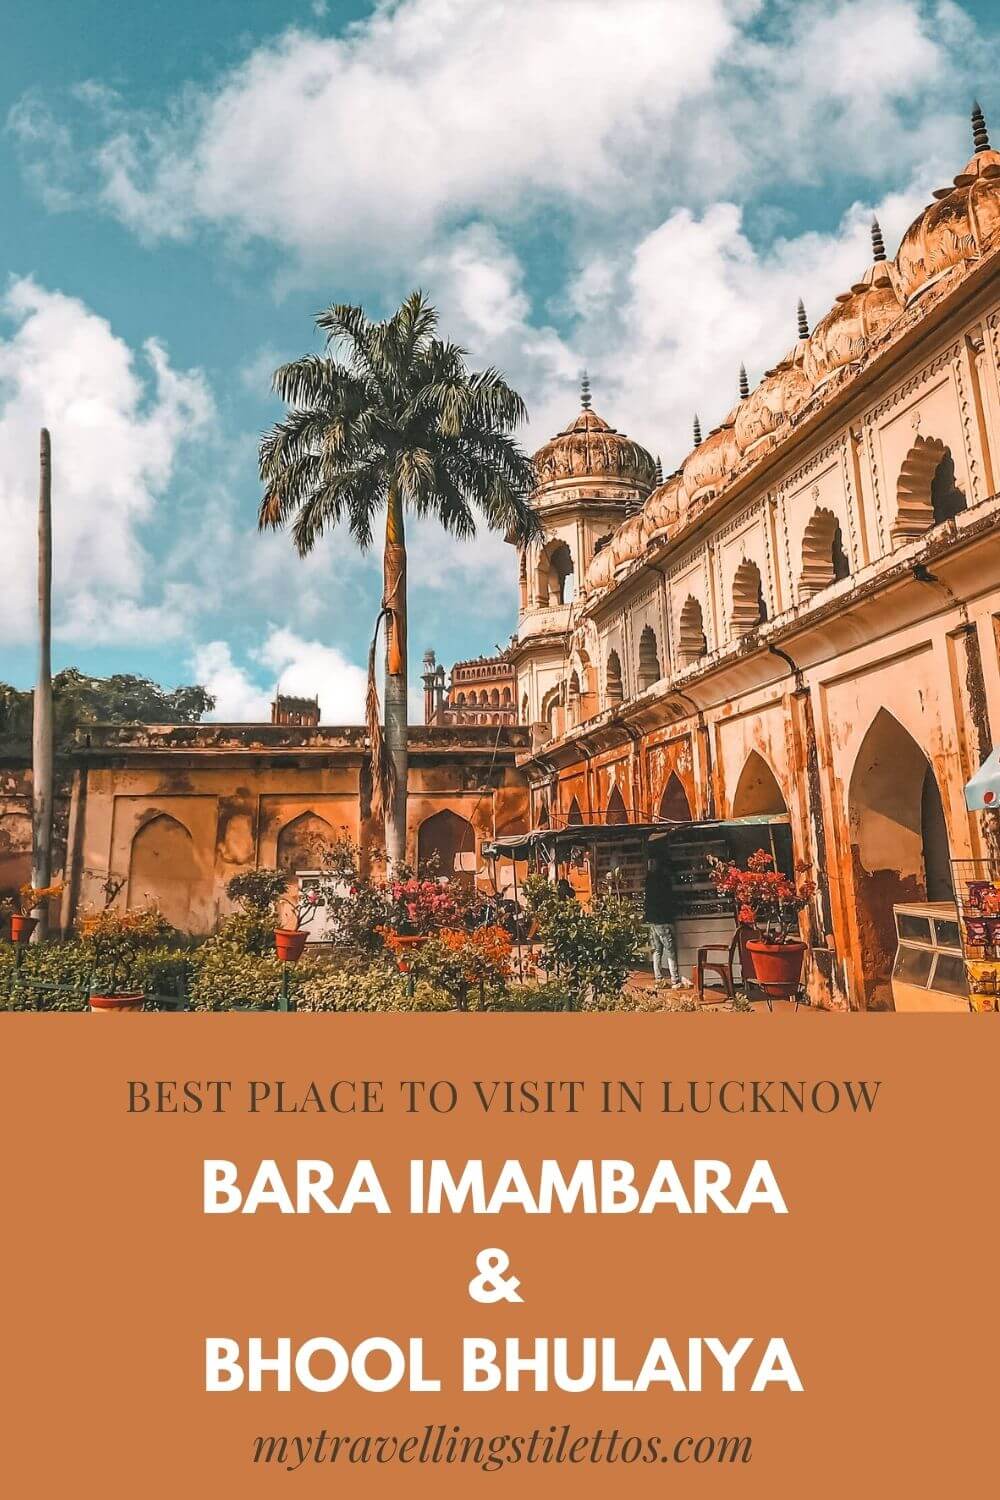 The Best Place To Visit in Lucknow